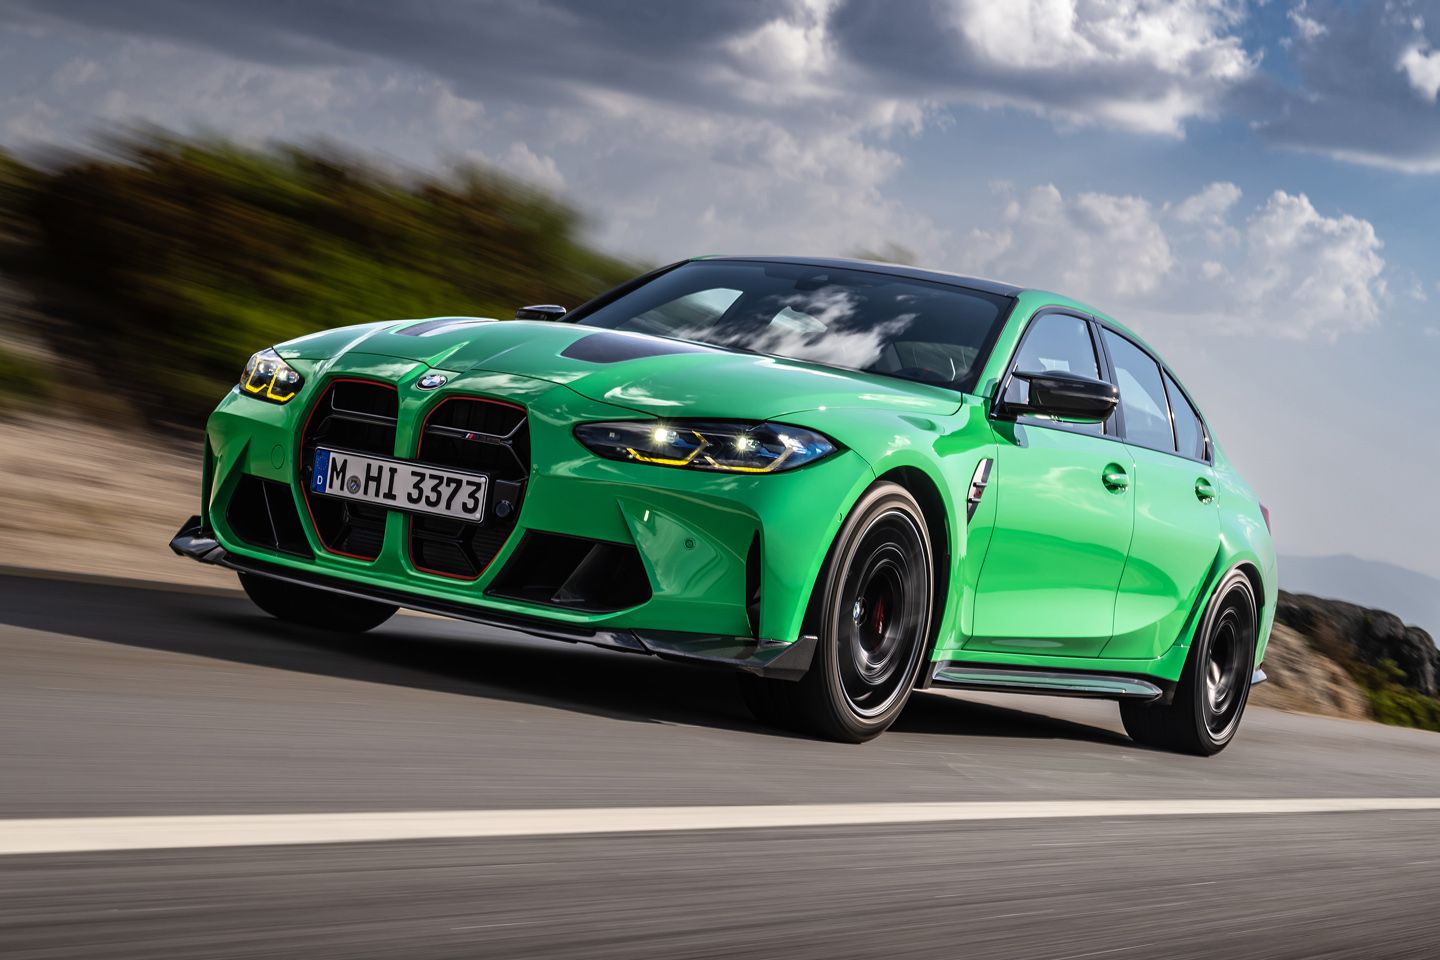 New CS inbound in the wake of record BMW M sales - PistonHeads UK